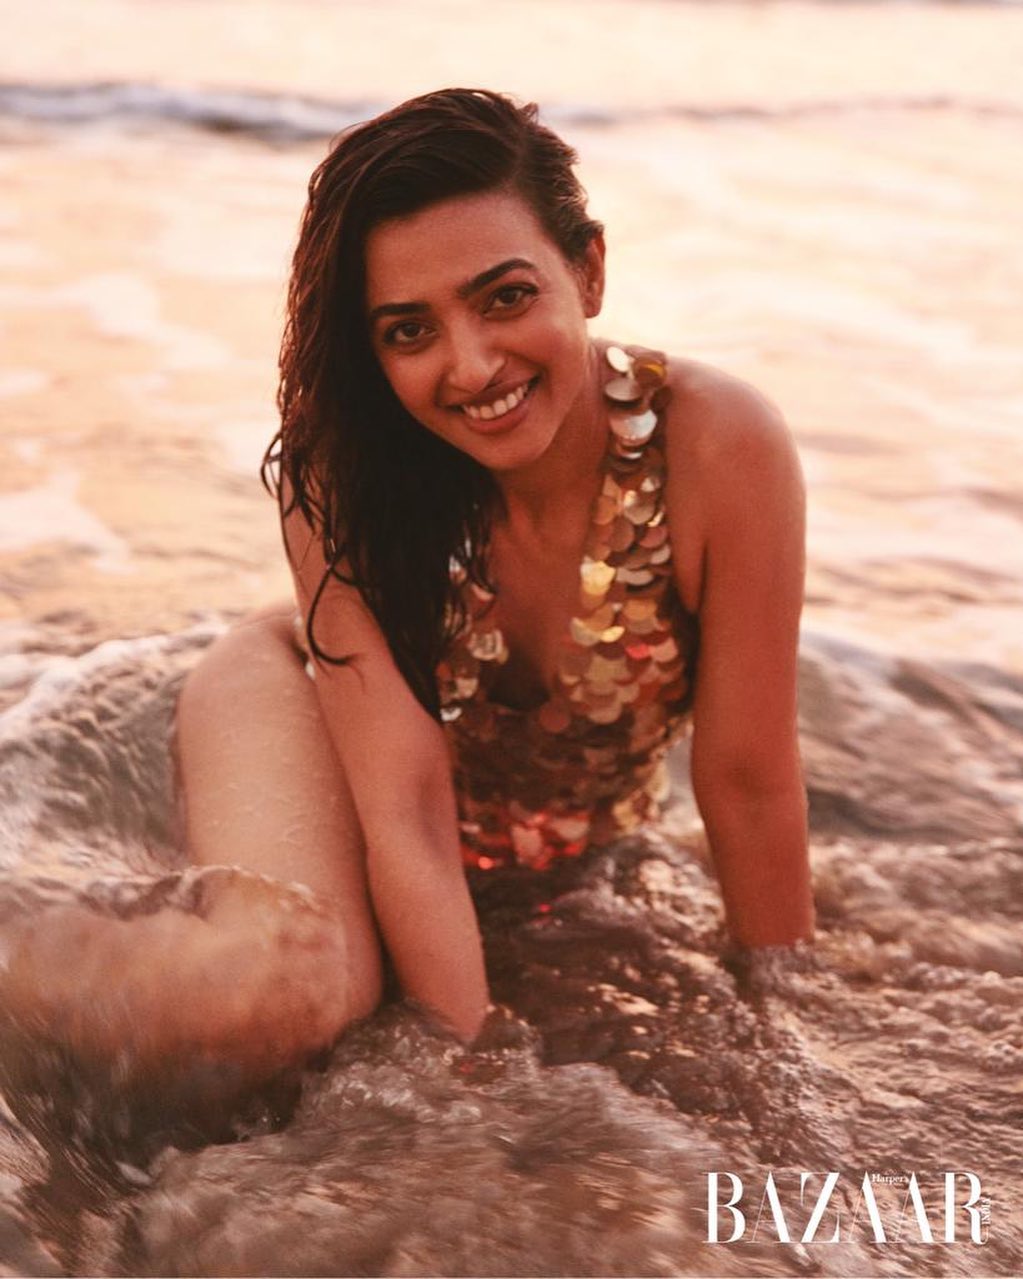 Radhika Apte looks gorgeous in the sequinned swimsuit.